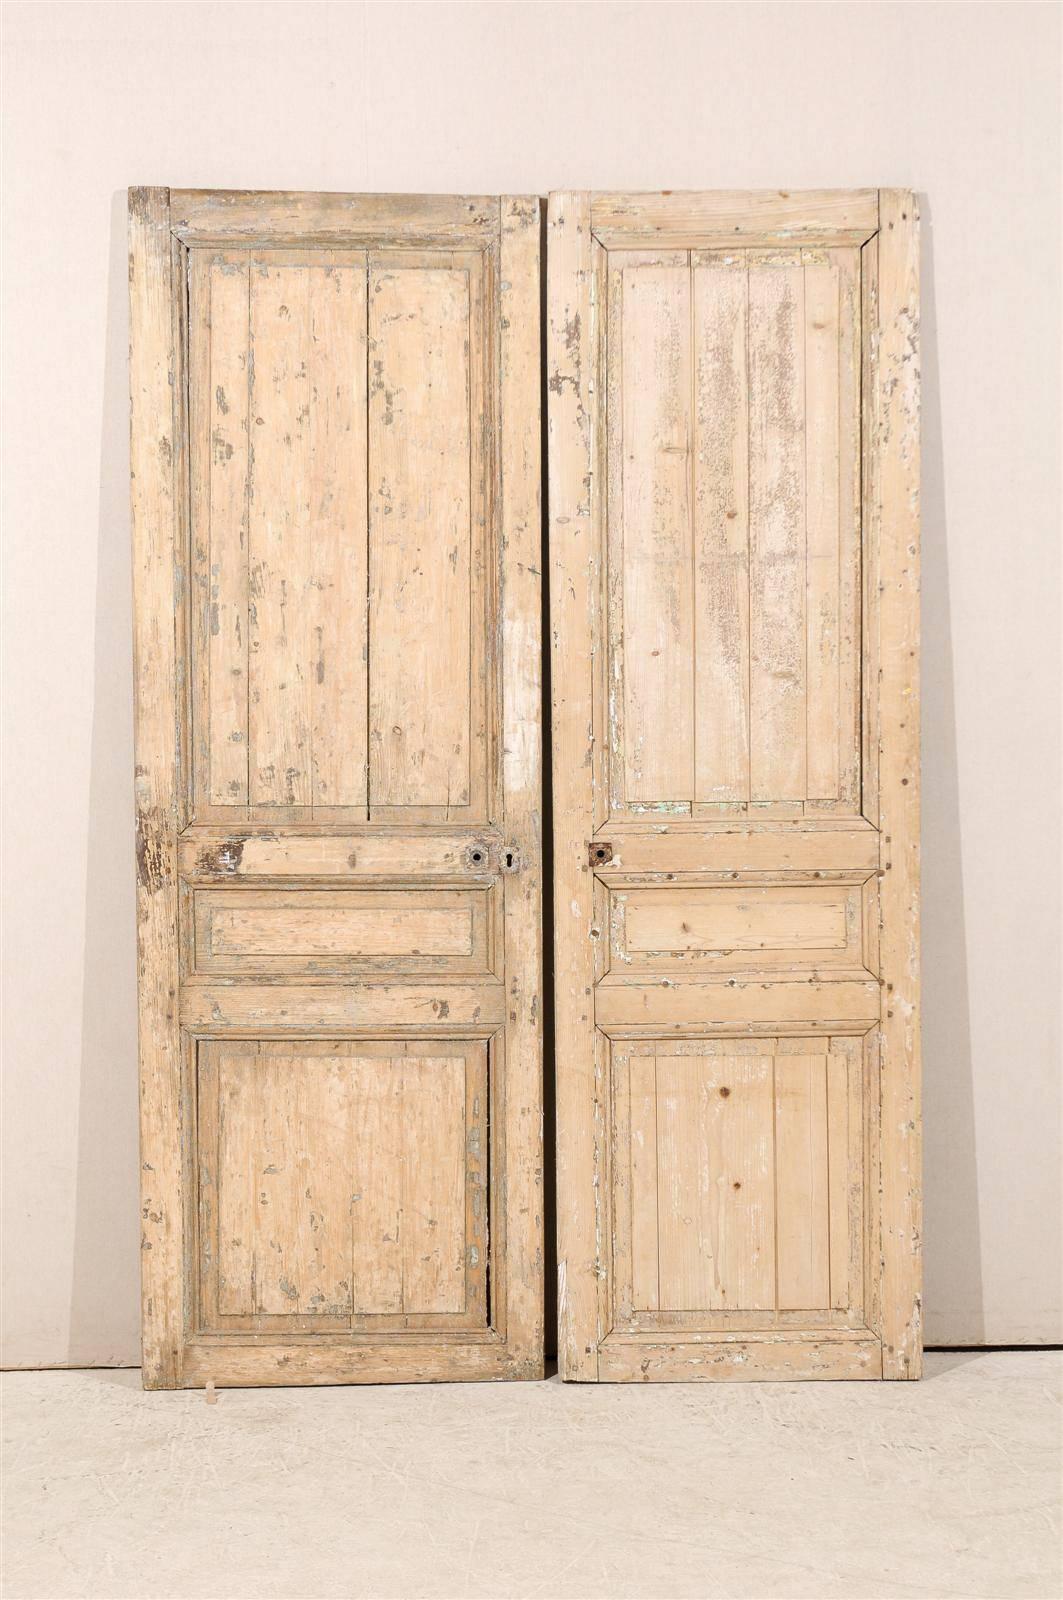 A pair of 19th century French dry scraped wooden doors with simply carved central panel.